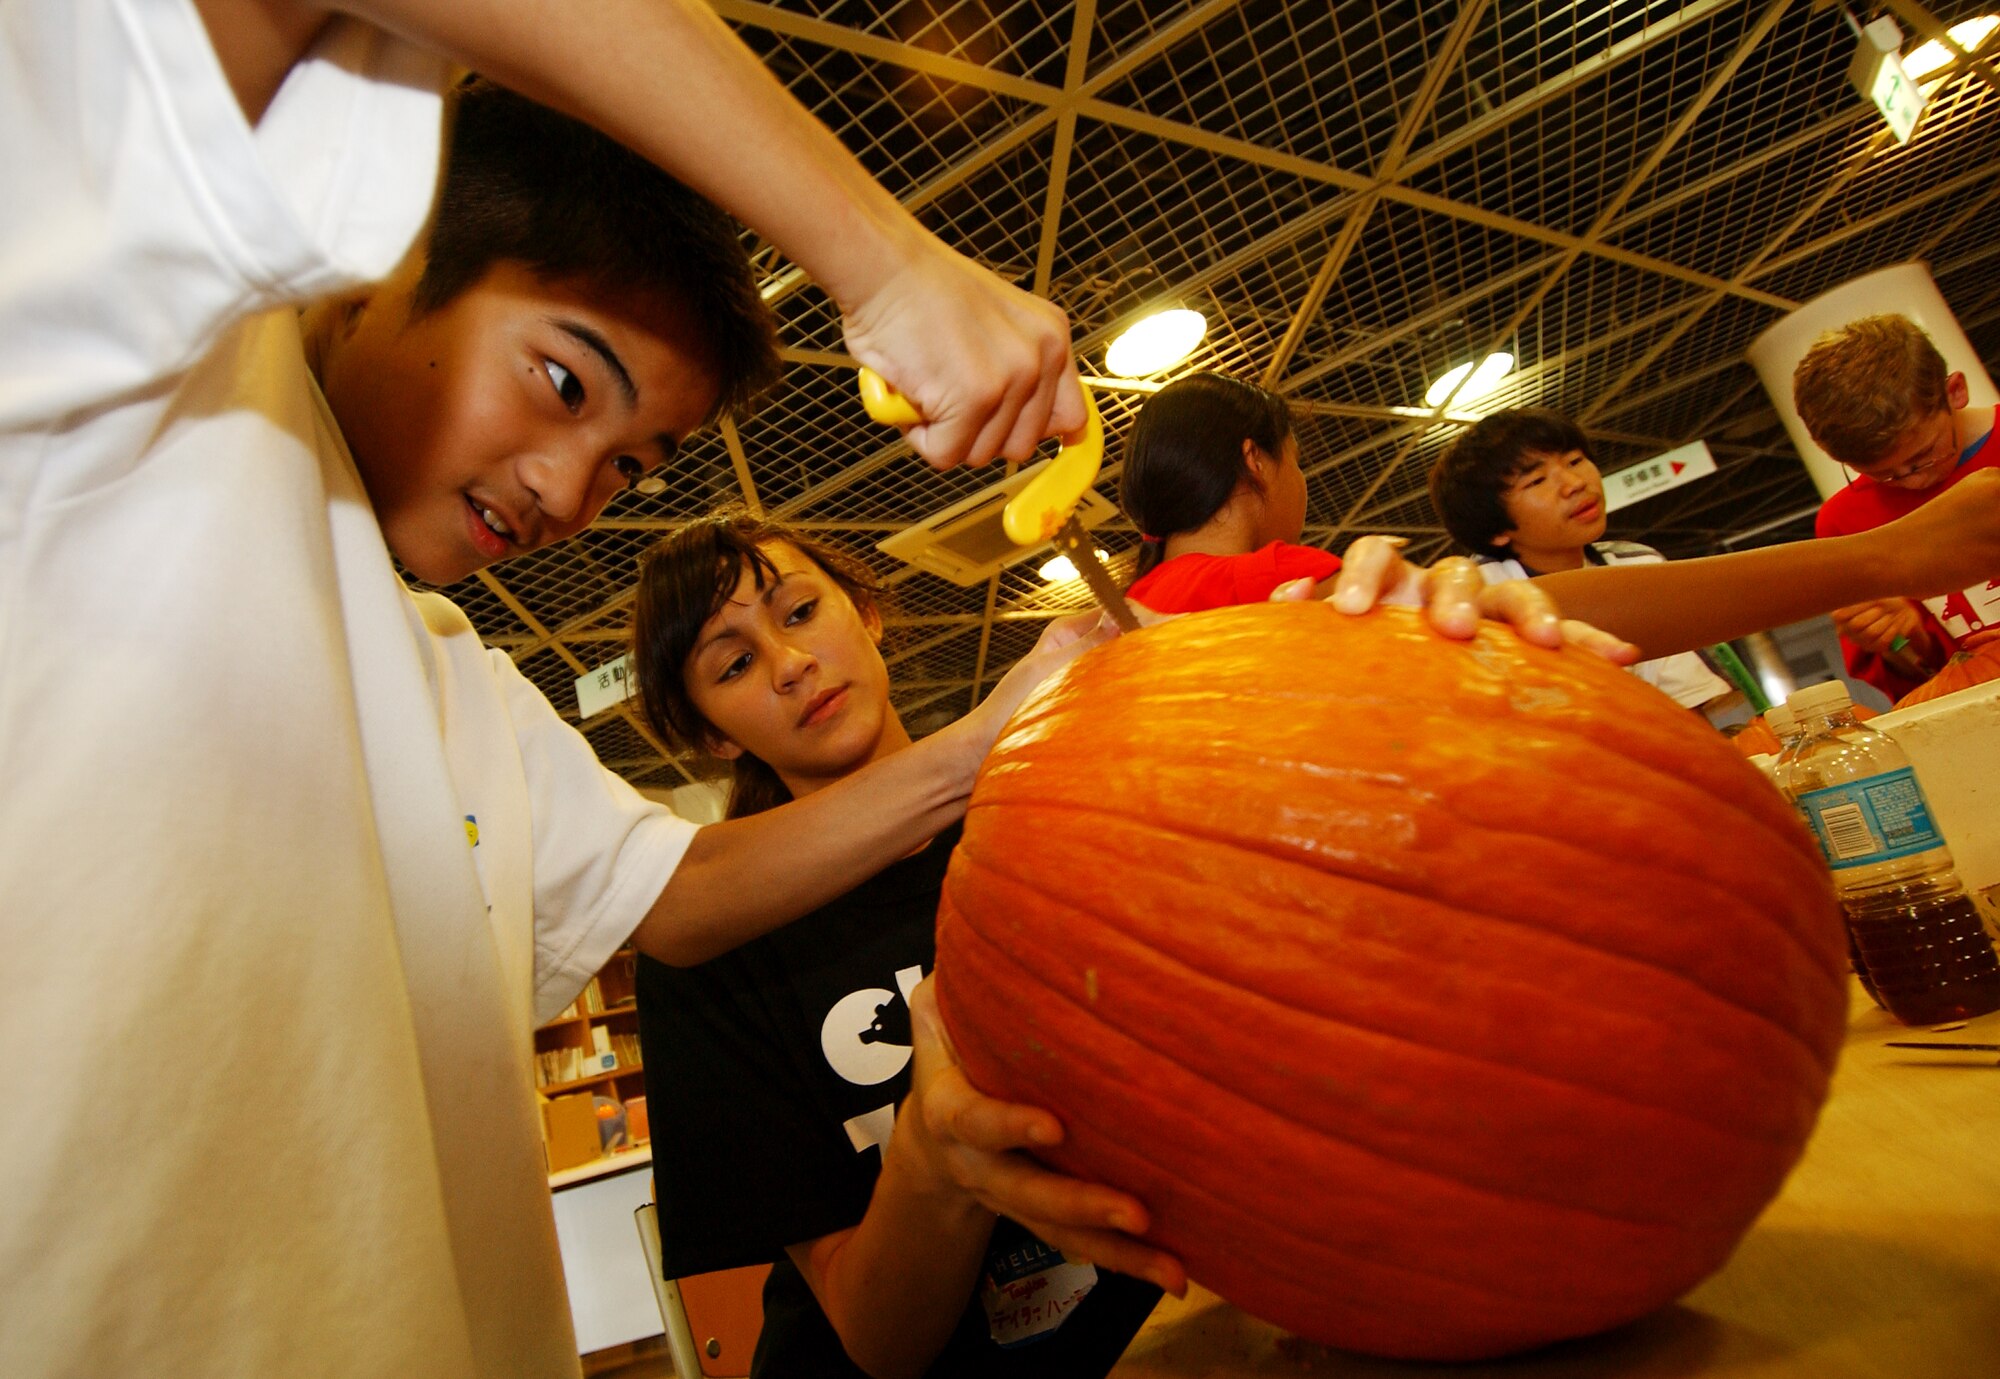 Ryousuke Shimabukuro,12, receives help carving a pumpkin from Taylor Hadden, 13, during a cultural exchange November 2, 2008 at the Okinawa Zoo. Members of Kadena's Club Zero and Japanese students  participated in various activities throughout the day during Pumpkin Palooza. (U.S. Air Force photo/Tech. Sgt. Rey Ramon)            